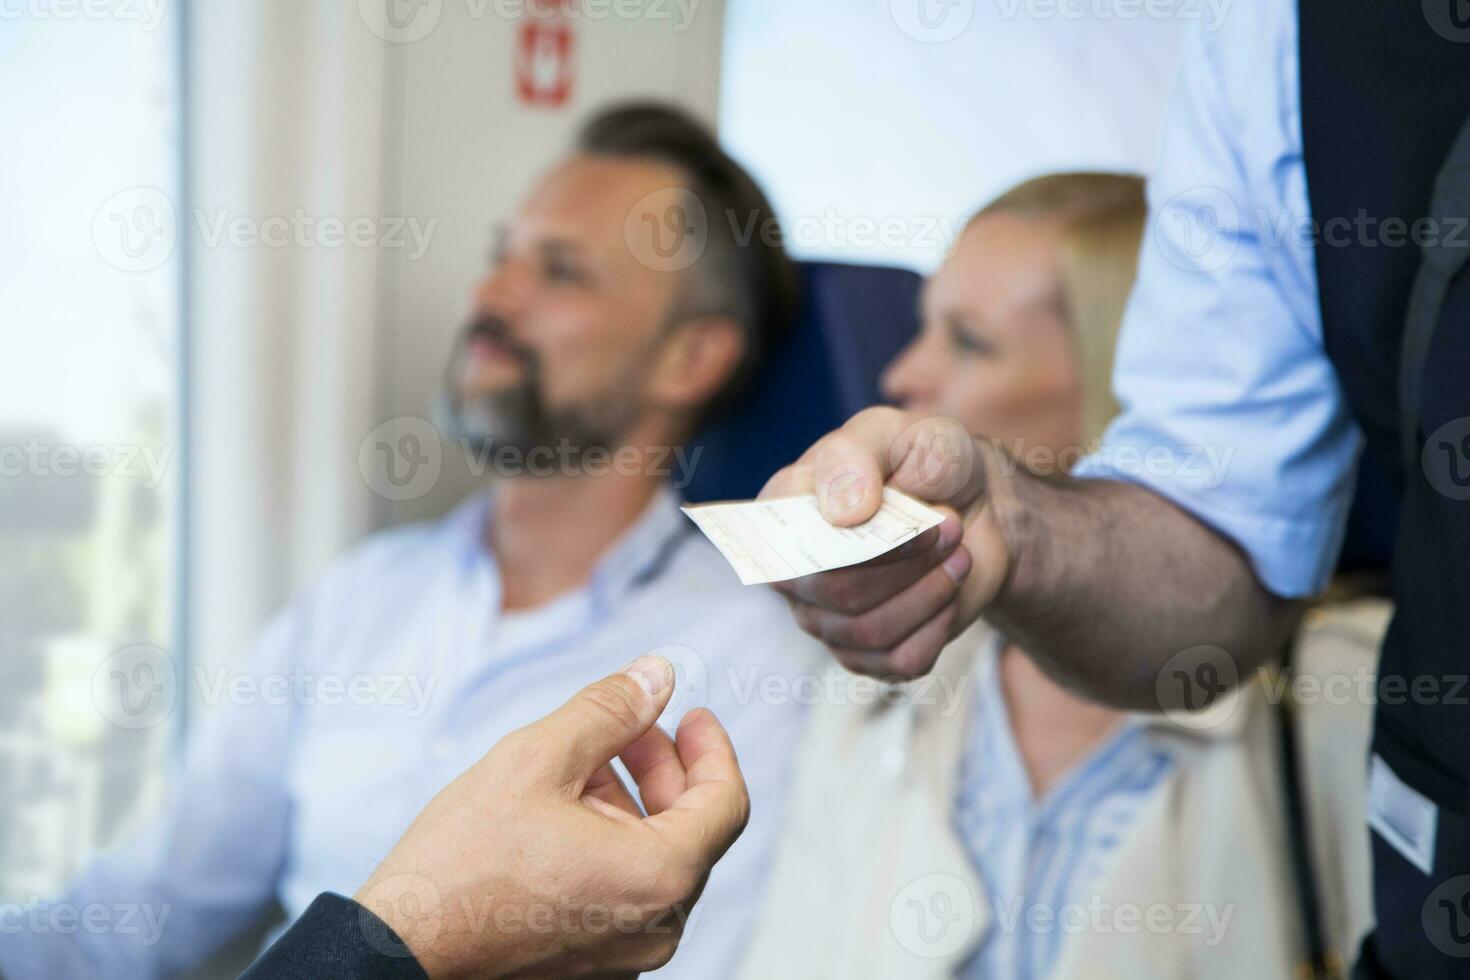 Conductor checking tickets of passengers in a train photo